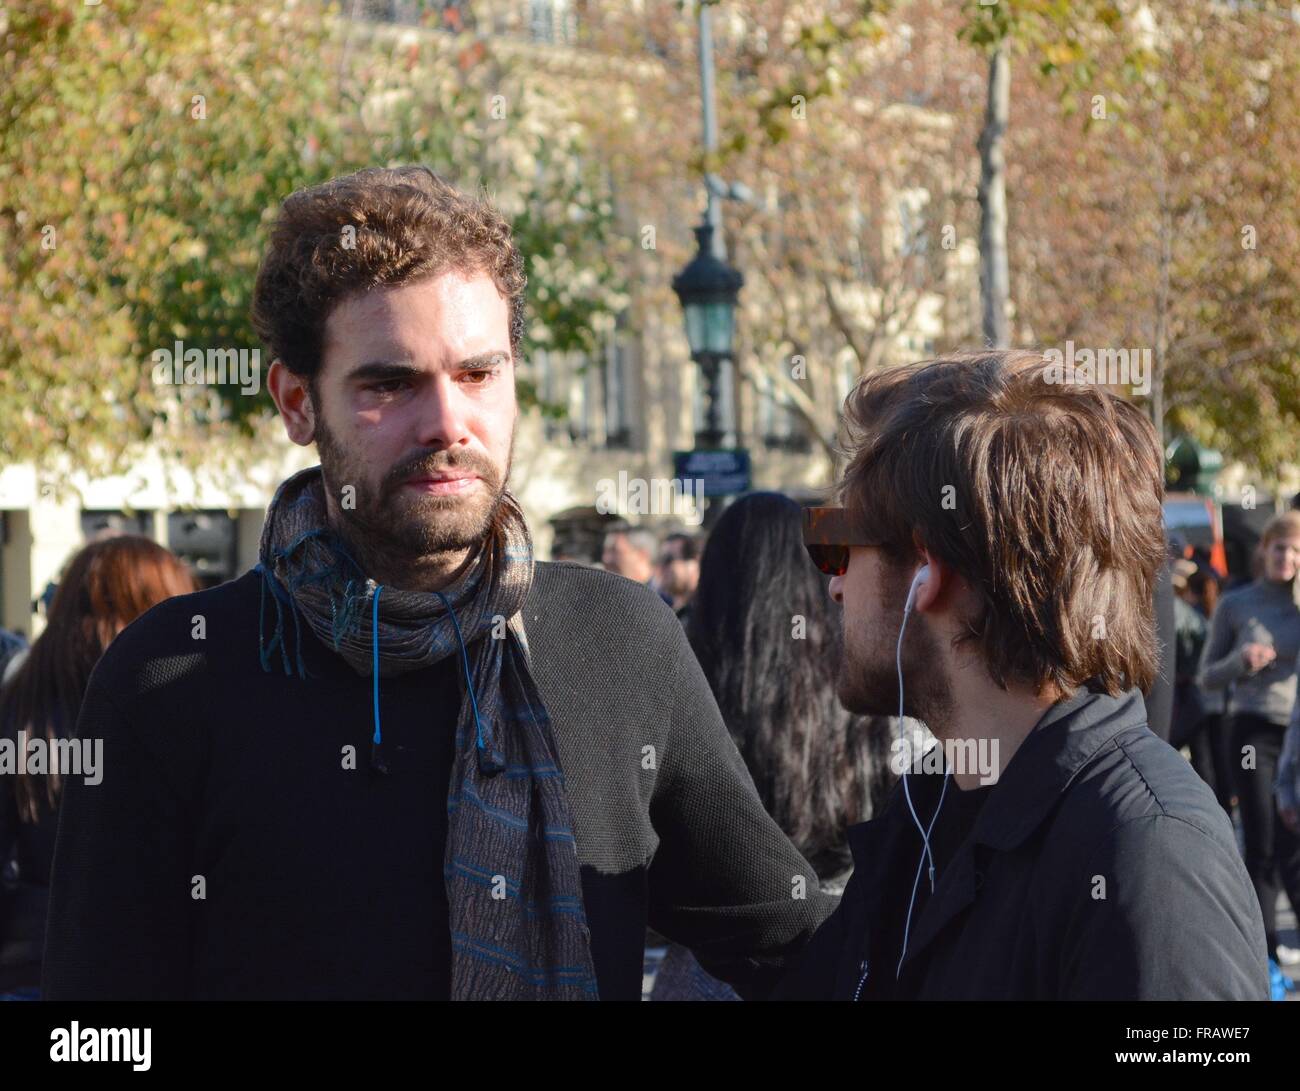 November 15th 2015. Paris, France. A man bursts into tears in the Place de la République as the events become all too much. ©Marc Ward/Alamy Stock Photo